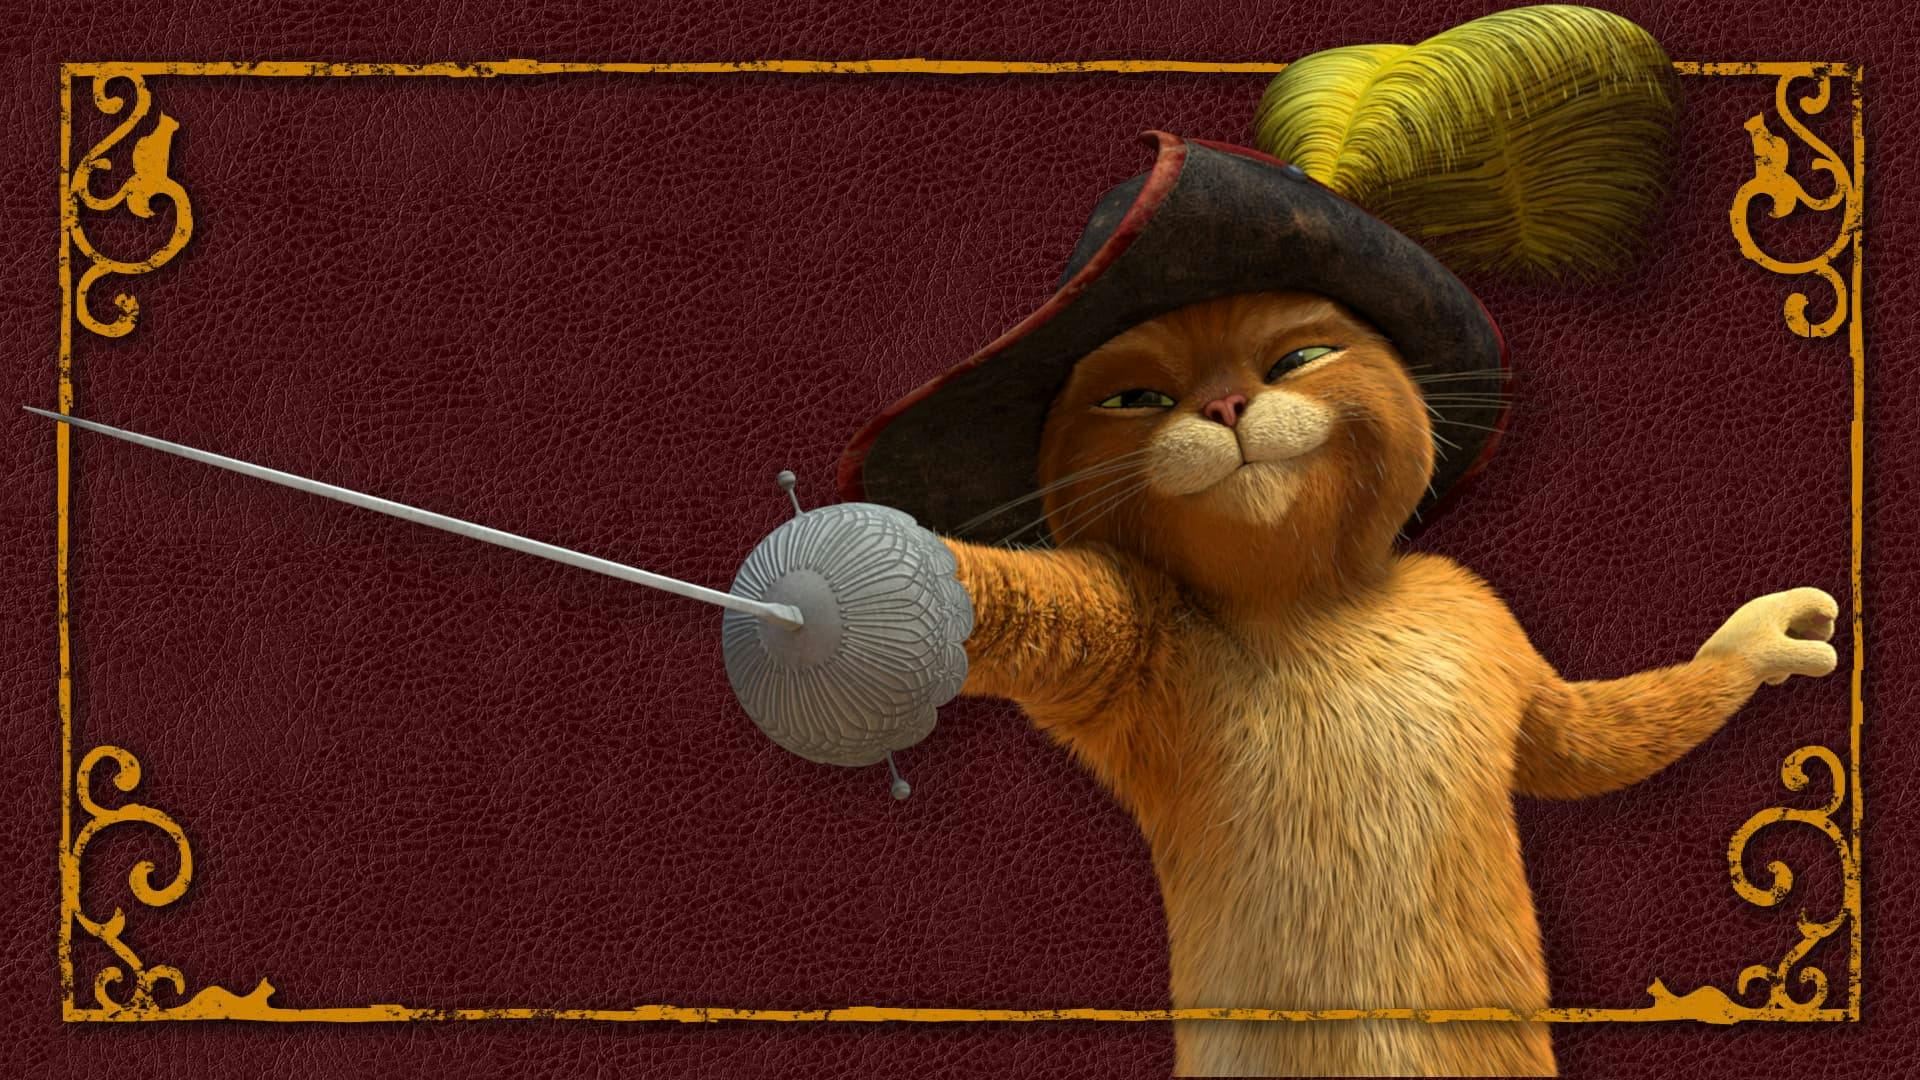 DreamWorks Puss in Boots waves his sword towards the viewer on a red leather background and framed in an ornate golden frame.